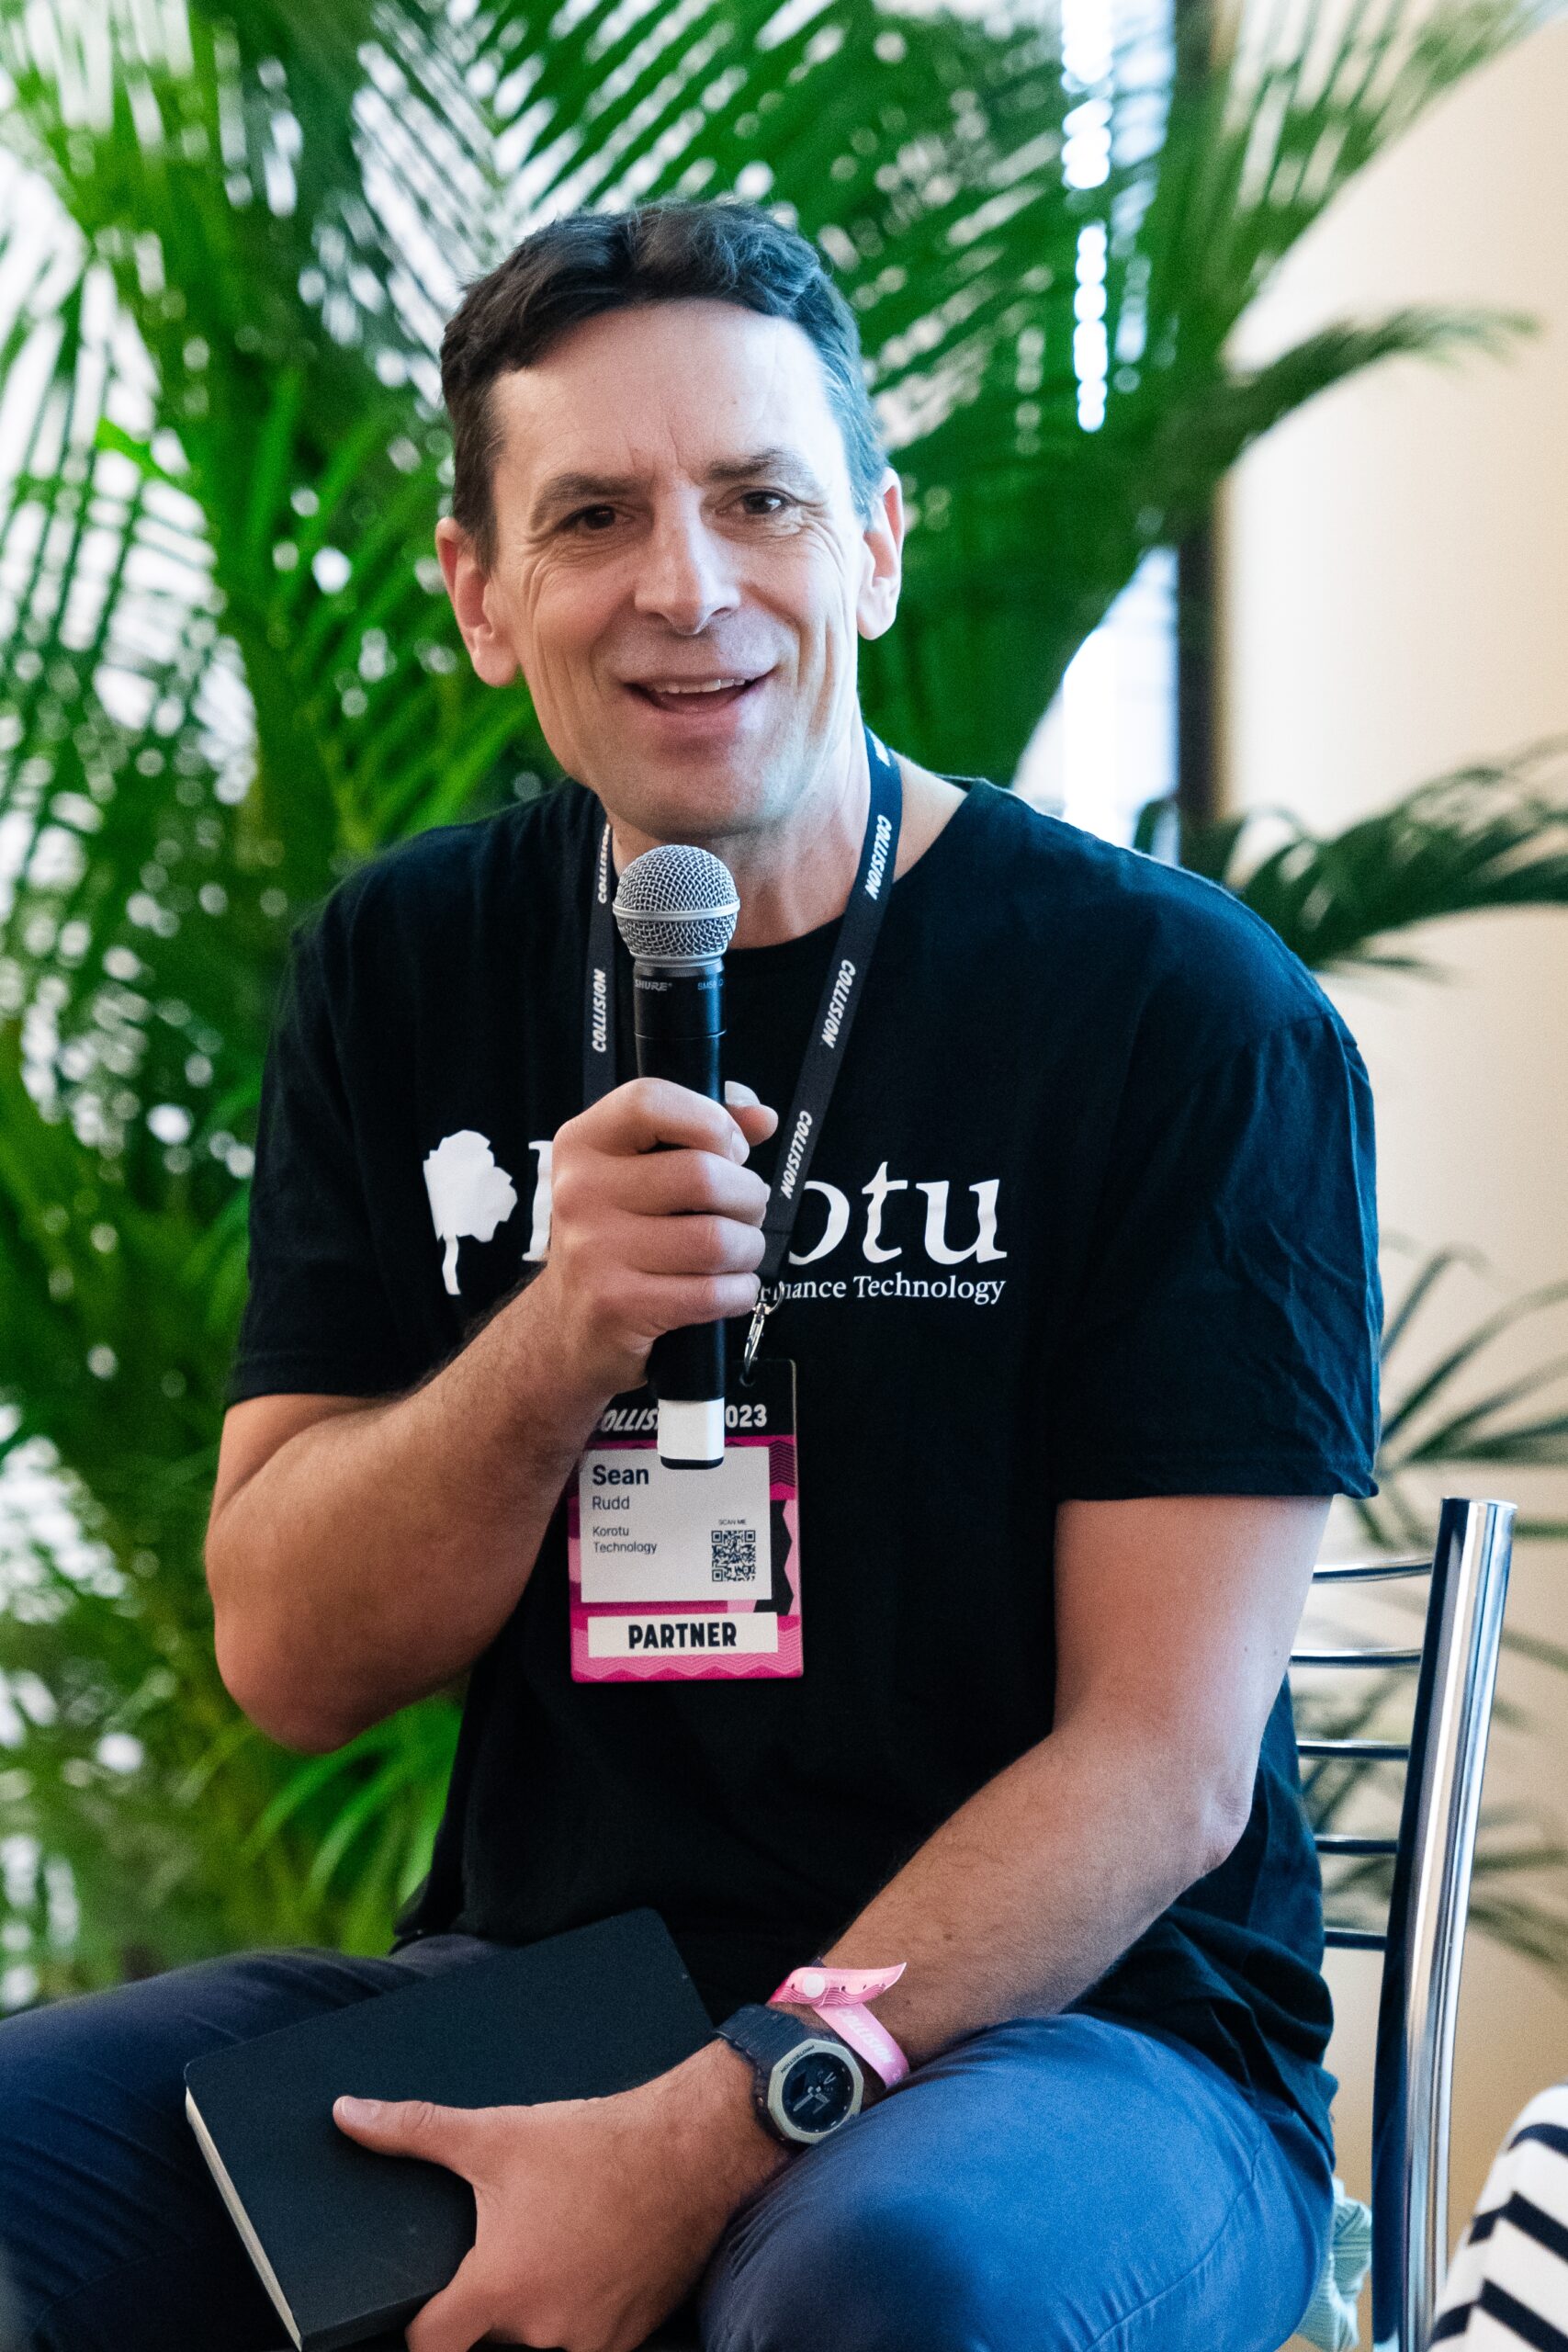 Man in black t-shirt, seated, holding a microphone 